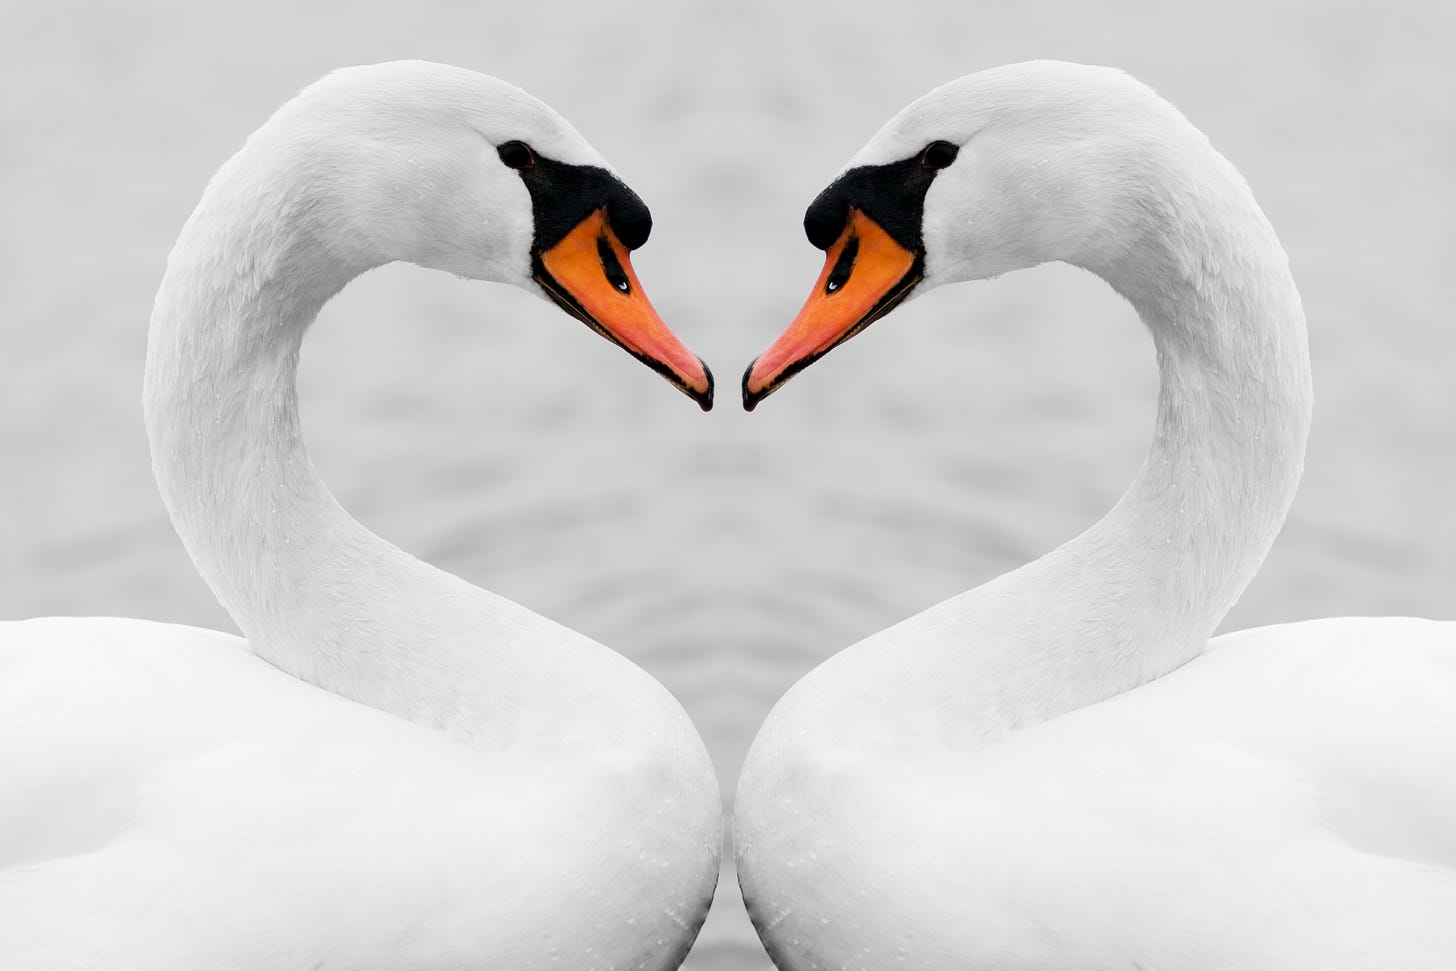 Two swans facing each other, in the shape of a love heart